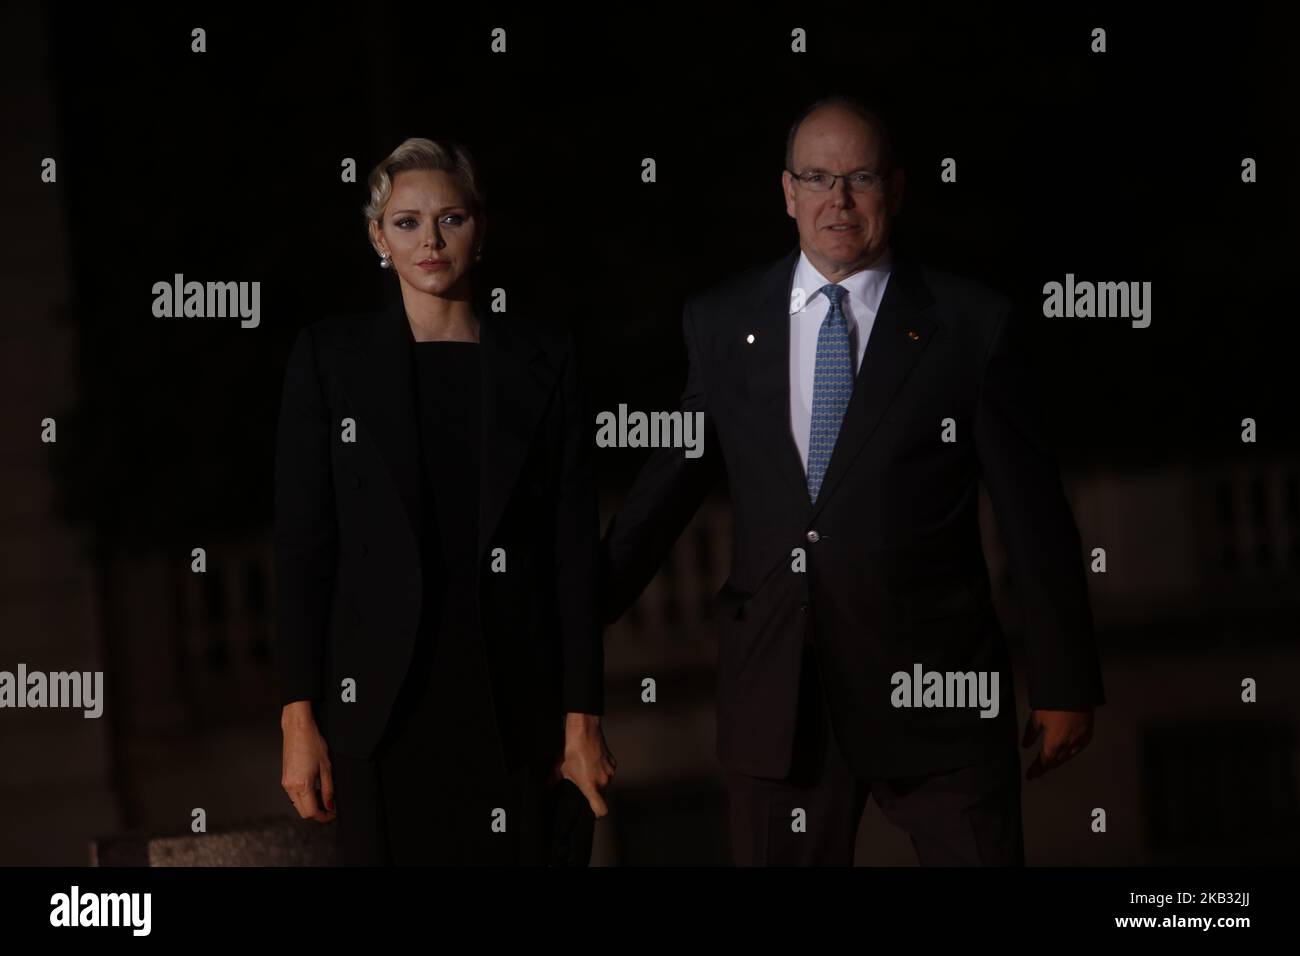 Albert II, Prince of Monaco and Charlene, Princess of Monaco arrive at the Musee d'Orsay in Paris on November 10, 2018 to attend a state diner and a visit of the Picasso exhibition as part of ceremonies marking the 100th anniversary of the 11 November 1918 armistice, ending World War I. (Photo by Mehdi Taamallah / NurPhoto) (Photo by Mehdi Taamallah/NurPhoto) Stock Photo